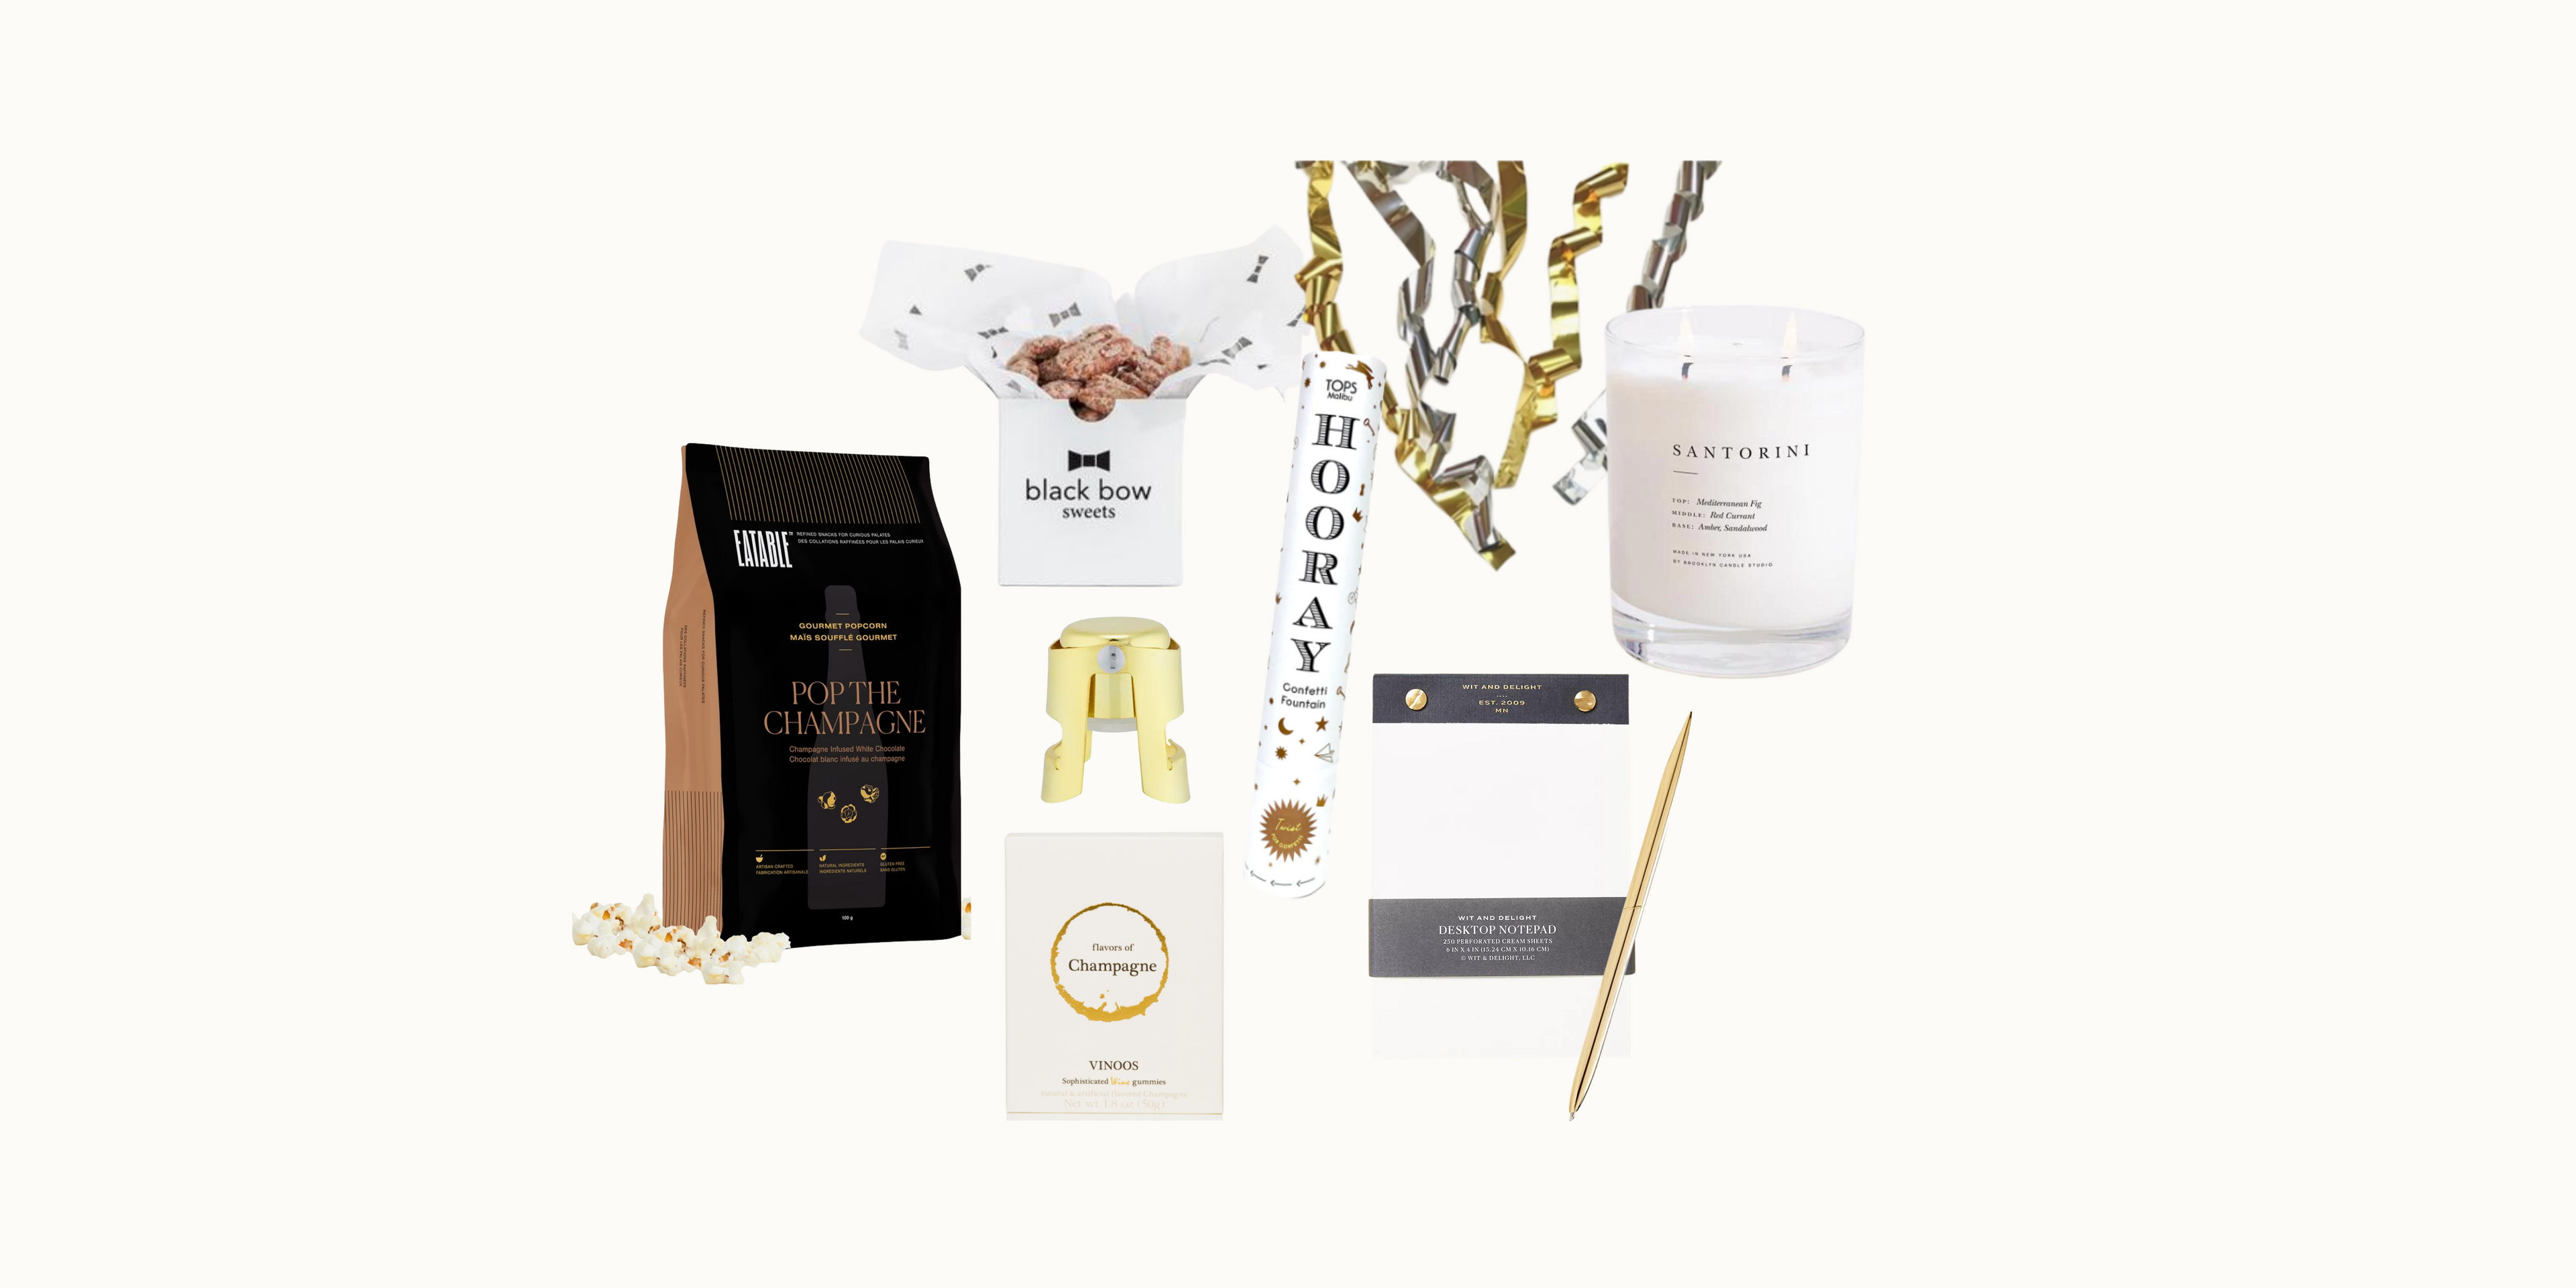 Bocu Holiday Gift Guide - Celebratory Themed Gift Boxes for Clients and Employees